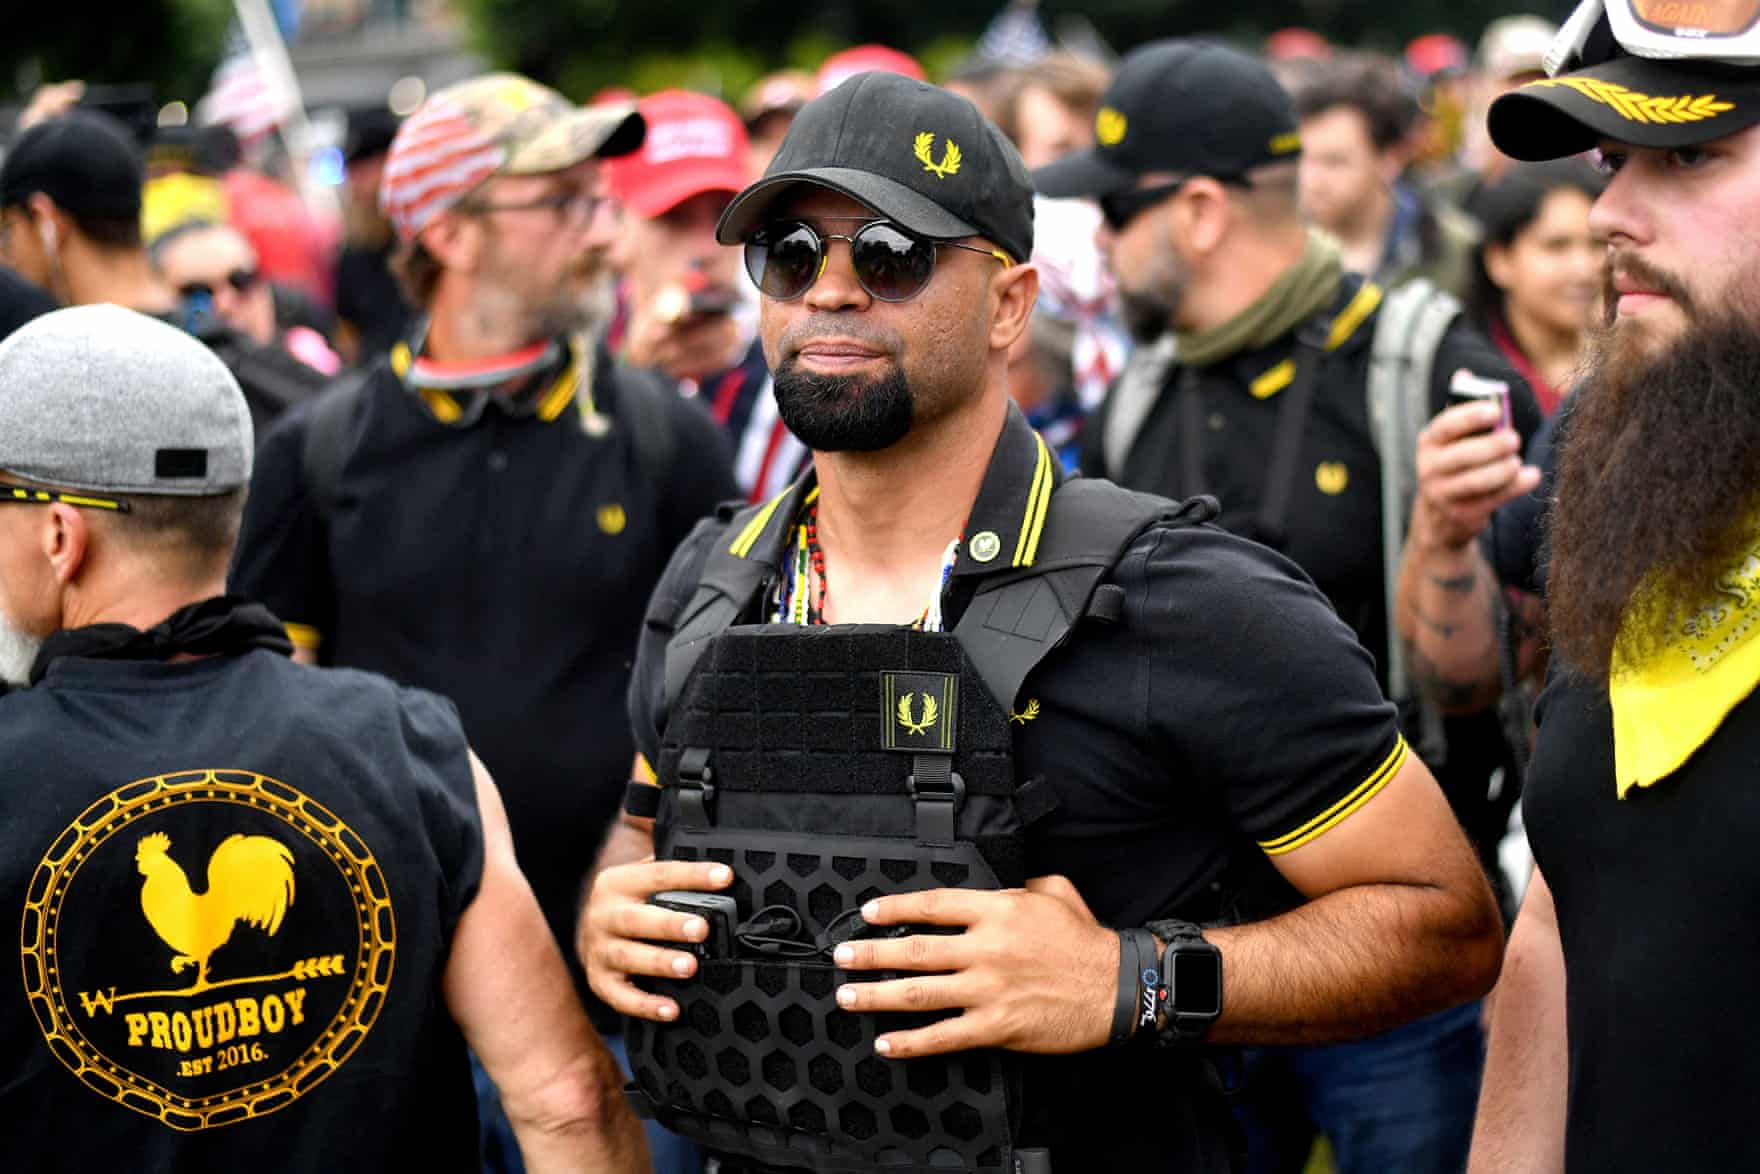 Proud Boys and Oath Keepers face different futures as their insurrectionist senior leaders remain jailed (theguardian.com)